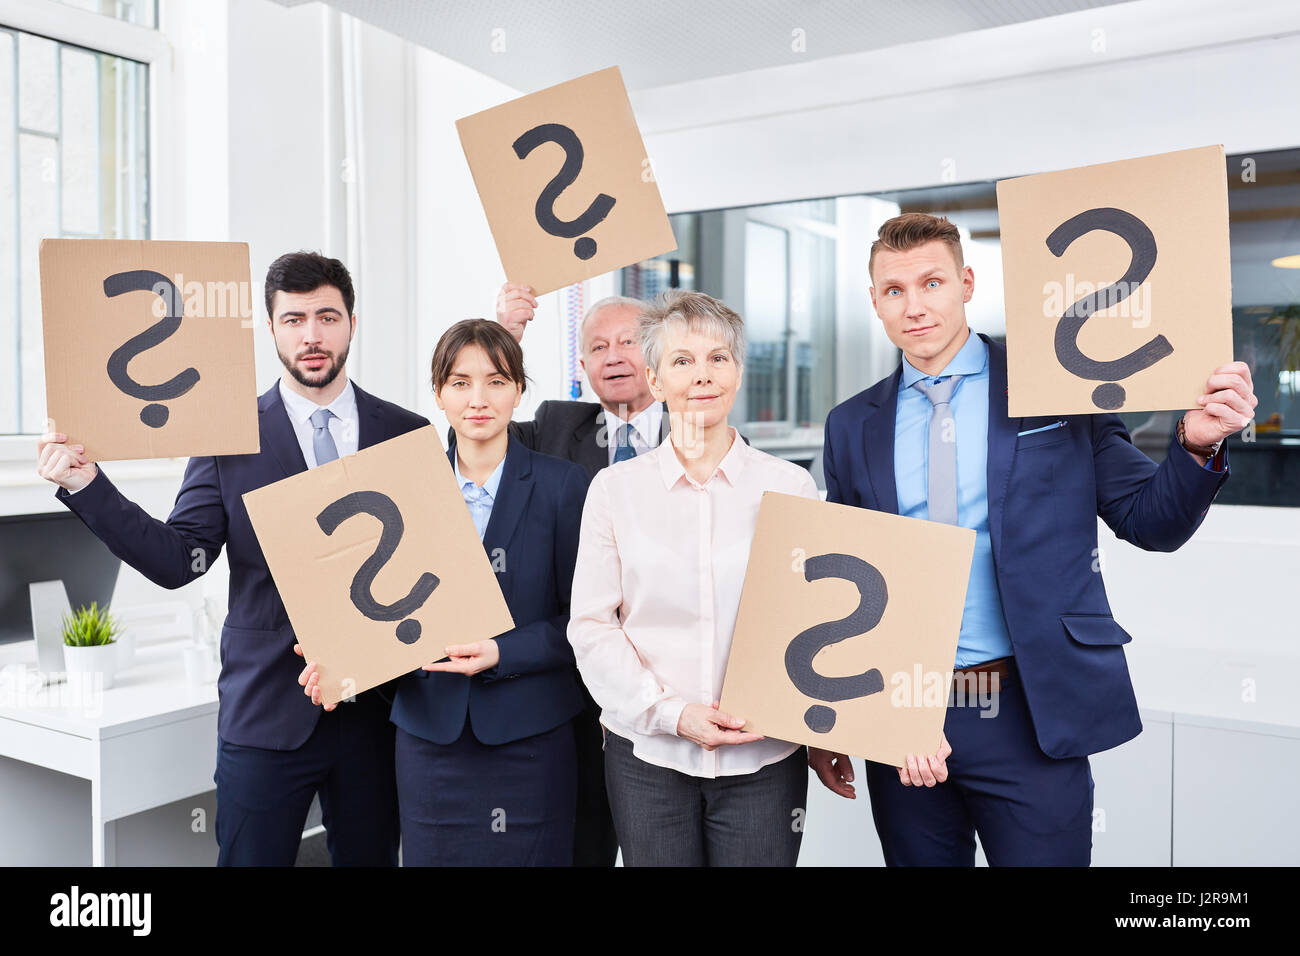 Business team holds question marks for doubt Stock Photo